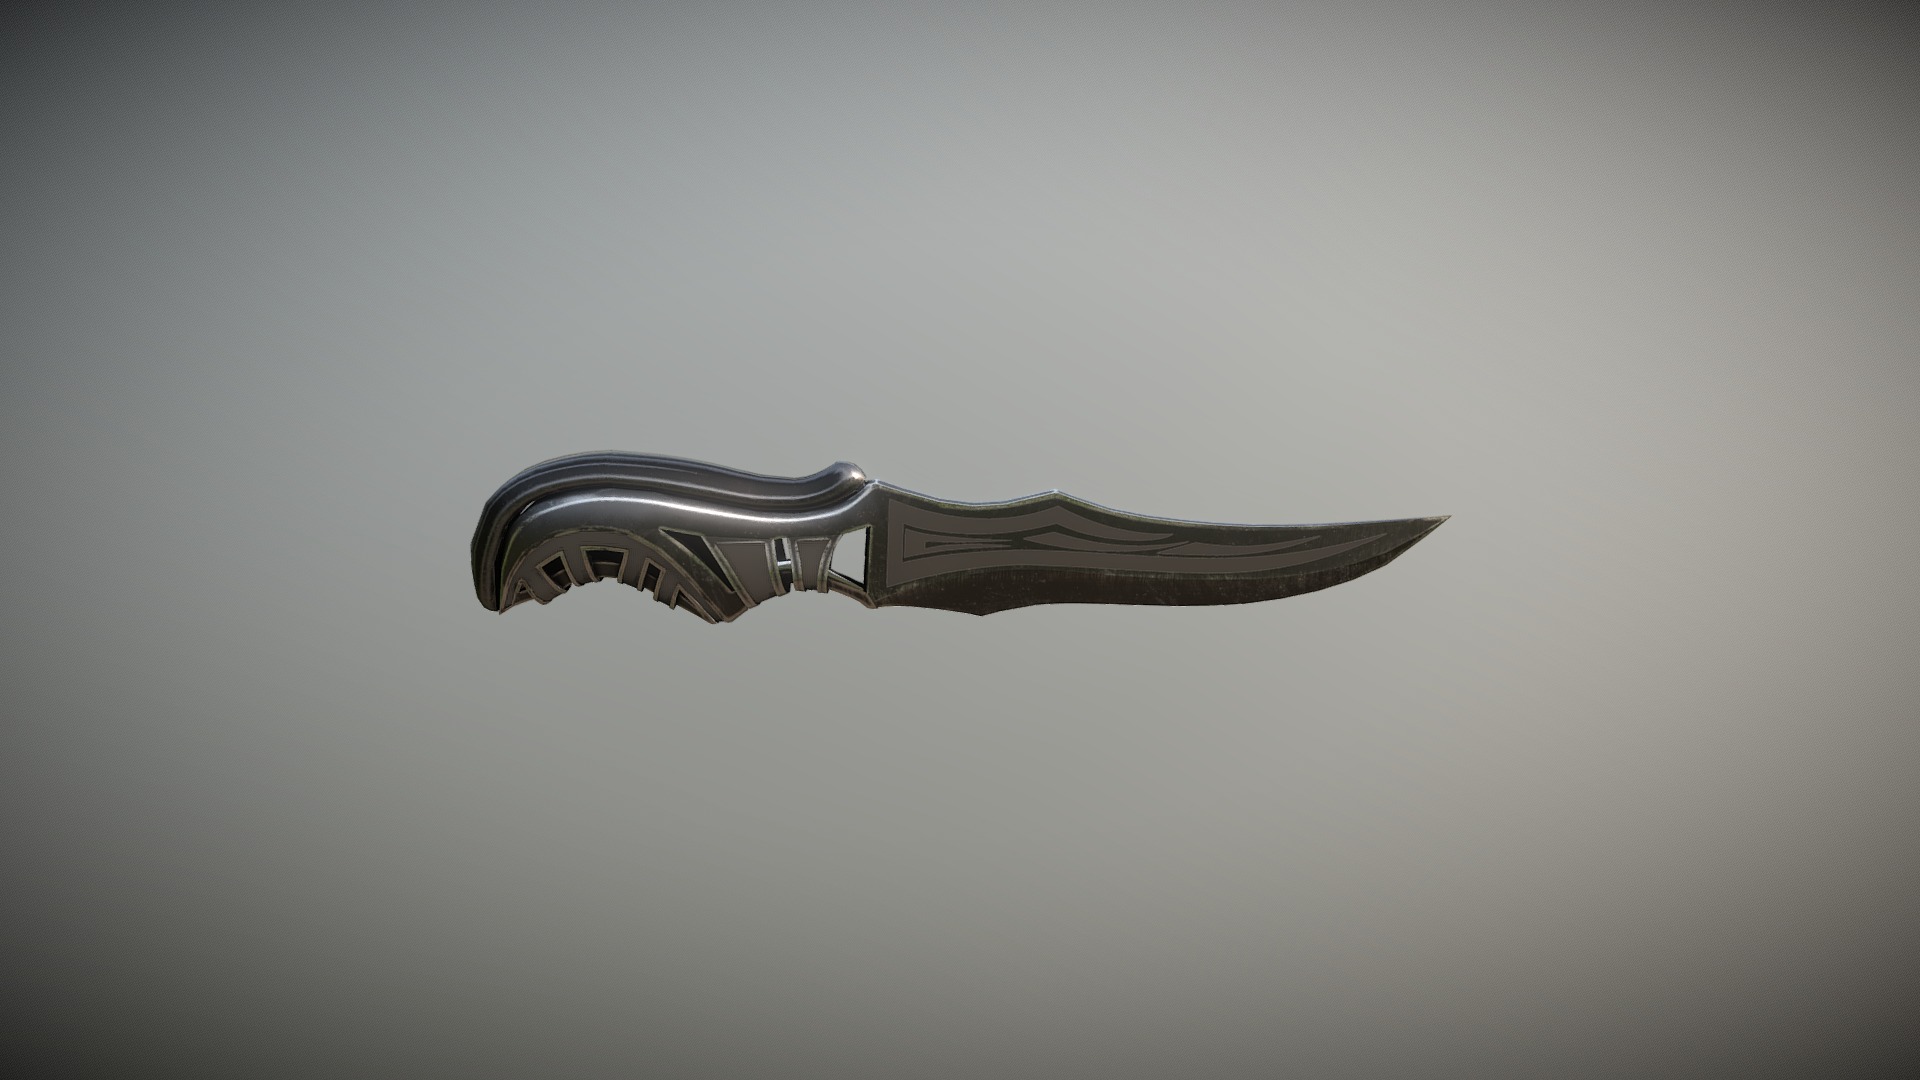 Knife Low -poly - 3D model by gnommon [0ce8c88] - Sketchfab